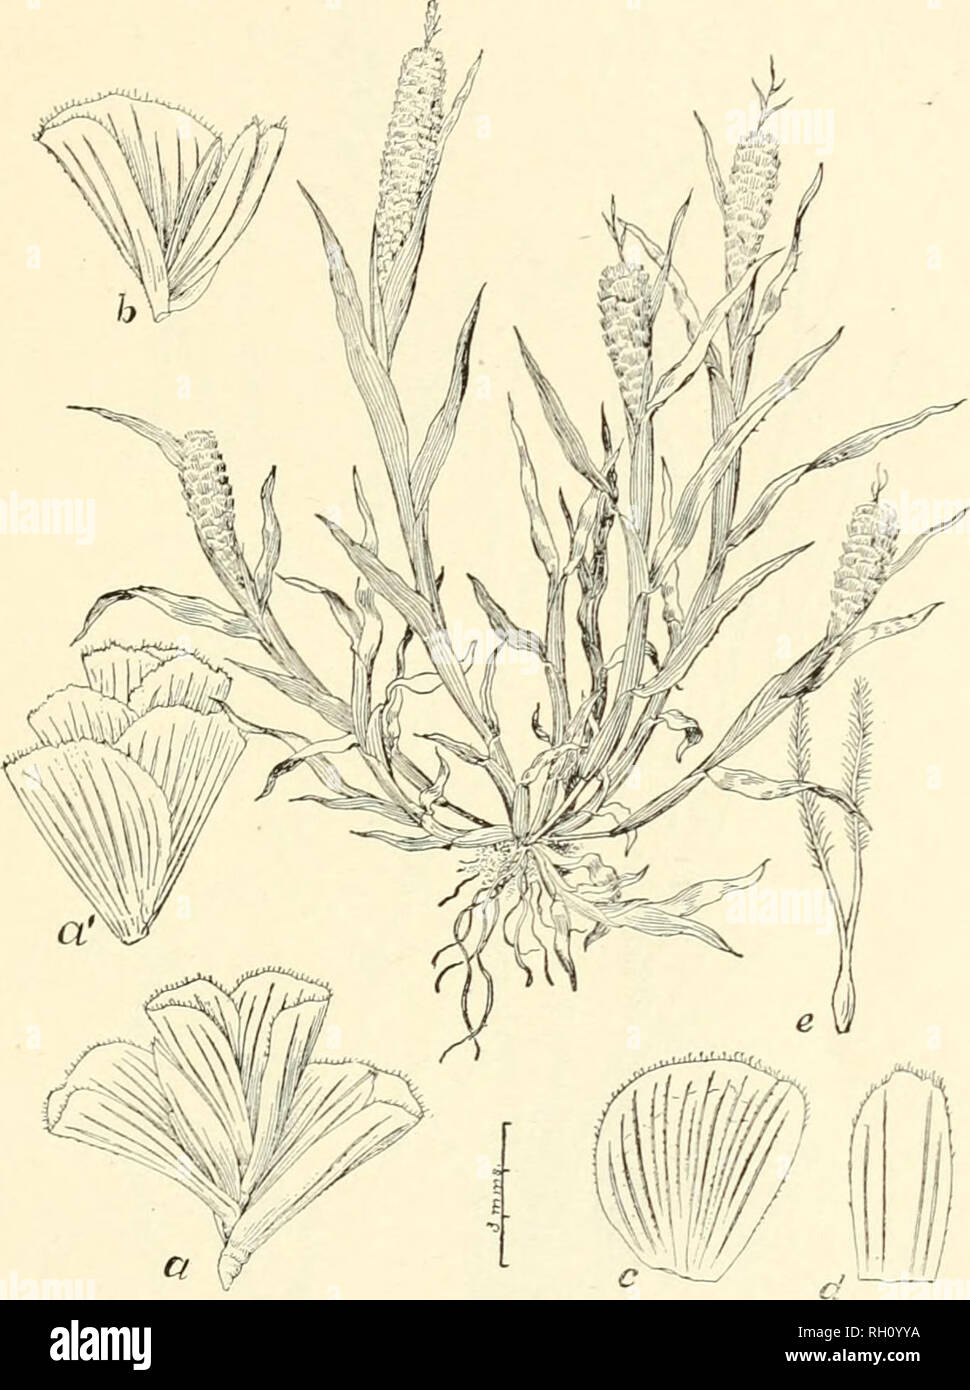 . Bulletin. Gramineae -- United States; Forage plants -- United States. 221. Fig. 517. Anthochloa colusaua (Davy), Scribuer, u. comb. {Stapfm colusana Davy, Eryth. 6:110. 1898; Neostapfia colusana Davy, Eryth. 7:43. 1899.)—A densely ca&gt;spitose, spreading or ascending, glabrous annual (?) with loose sheaths, rather short, flat leaves, and densely flowered, oblong or cylindrical, spike-like panicles 3 to 7 cm. long. Spikelets (a) usually 3- to 5-flowered, 6 to 7 mm. long, with verj' broad, flabelliform, ciliate-fringed flow- ering glumes (c) about 5 mm. long. Lower empty glumes, when present, Stock Photo